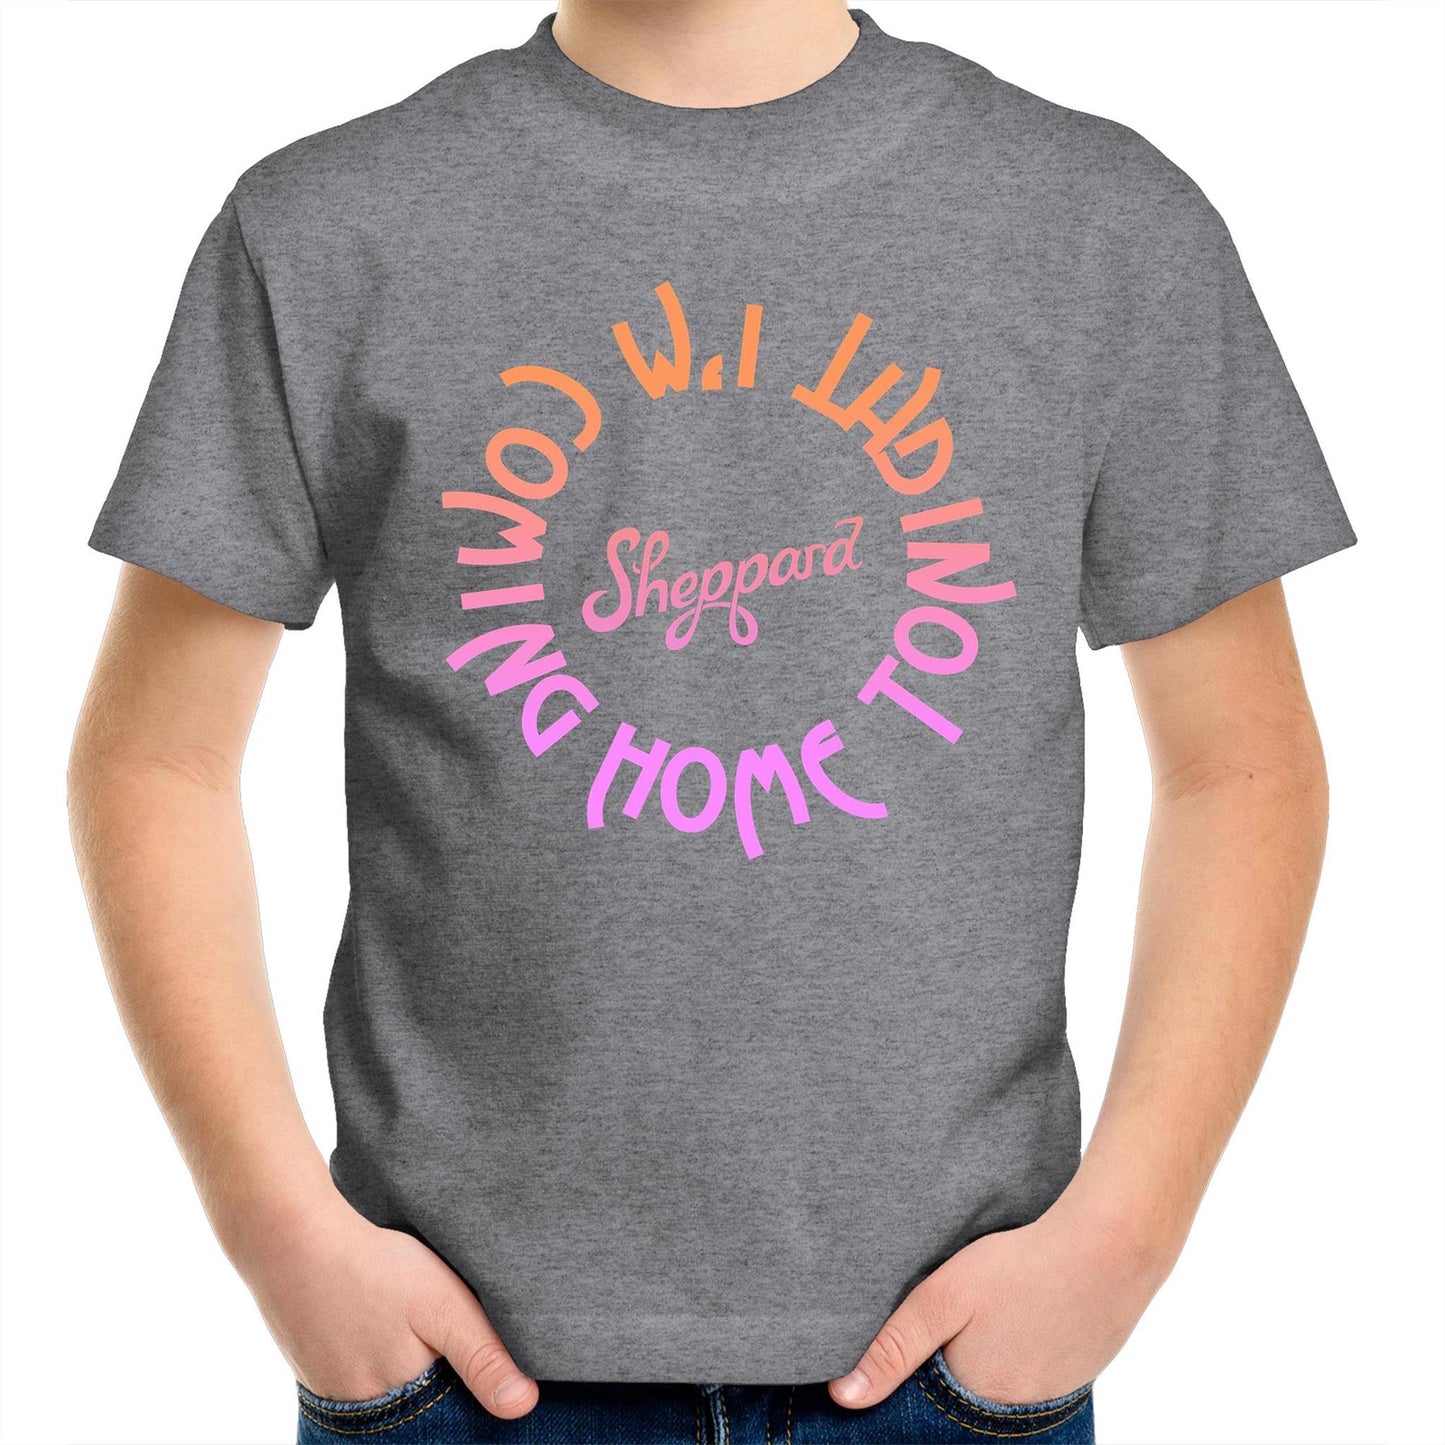 NEW! Coming Home - Kids T-Shirt